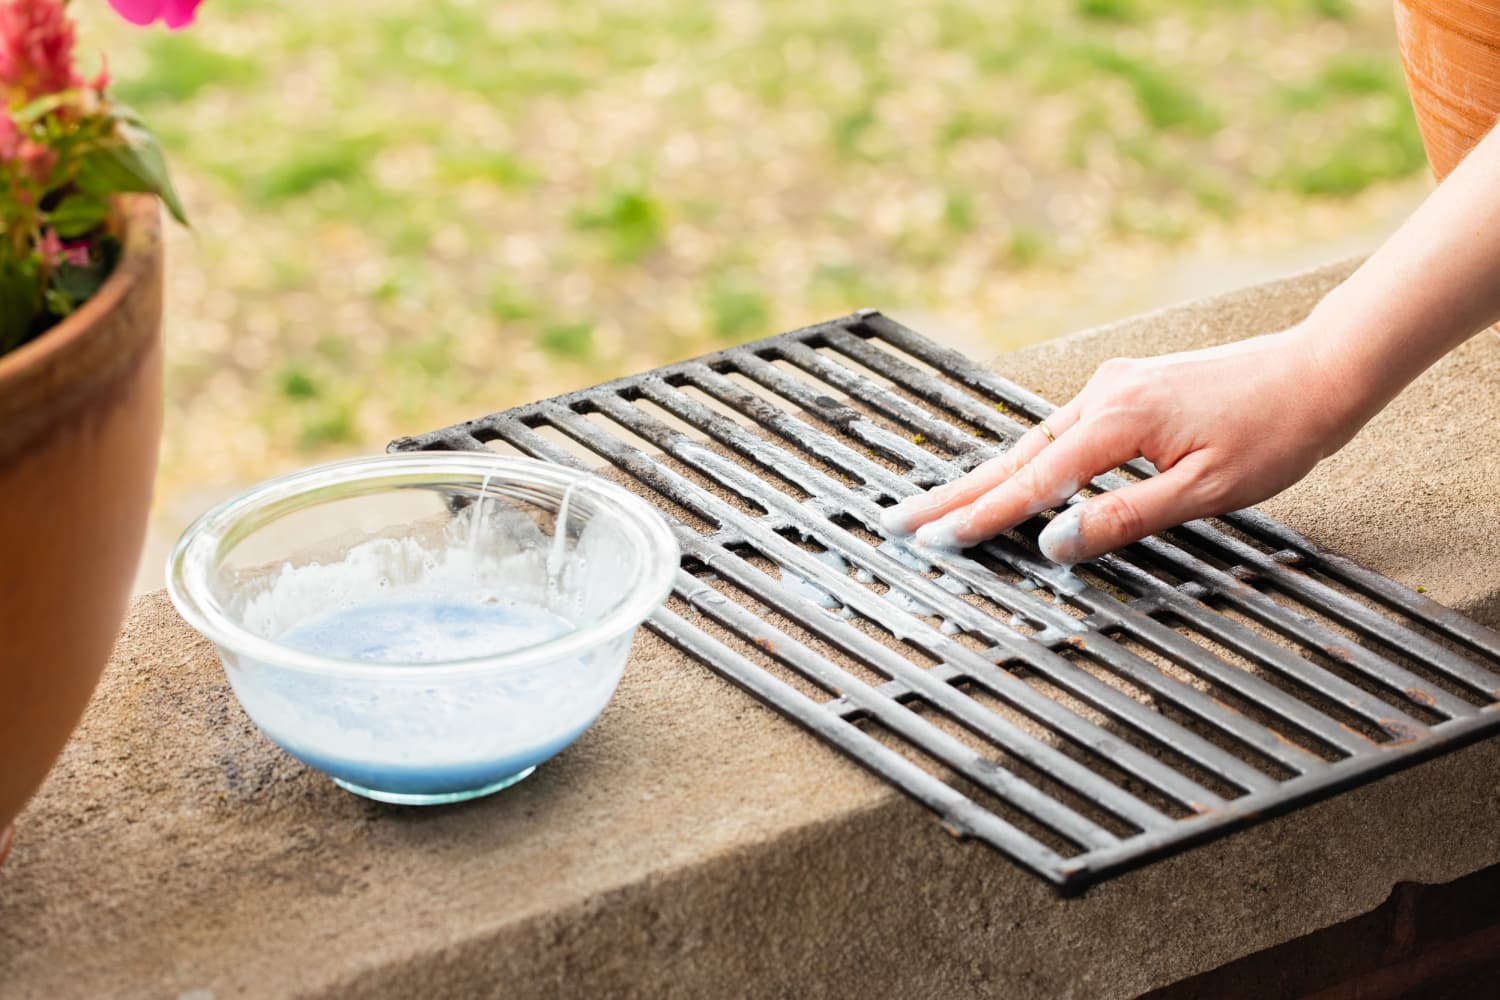 11 Best Grill Cleaners of 2023